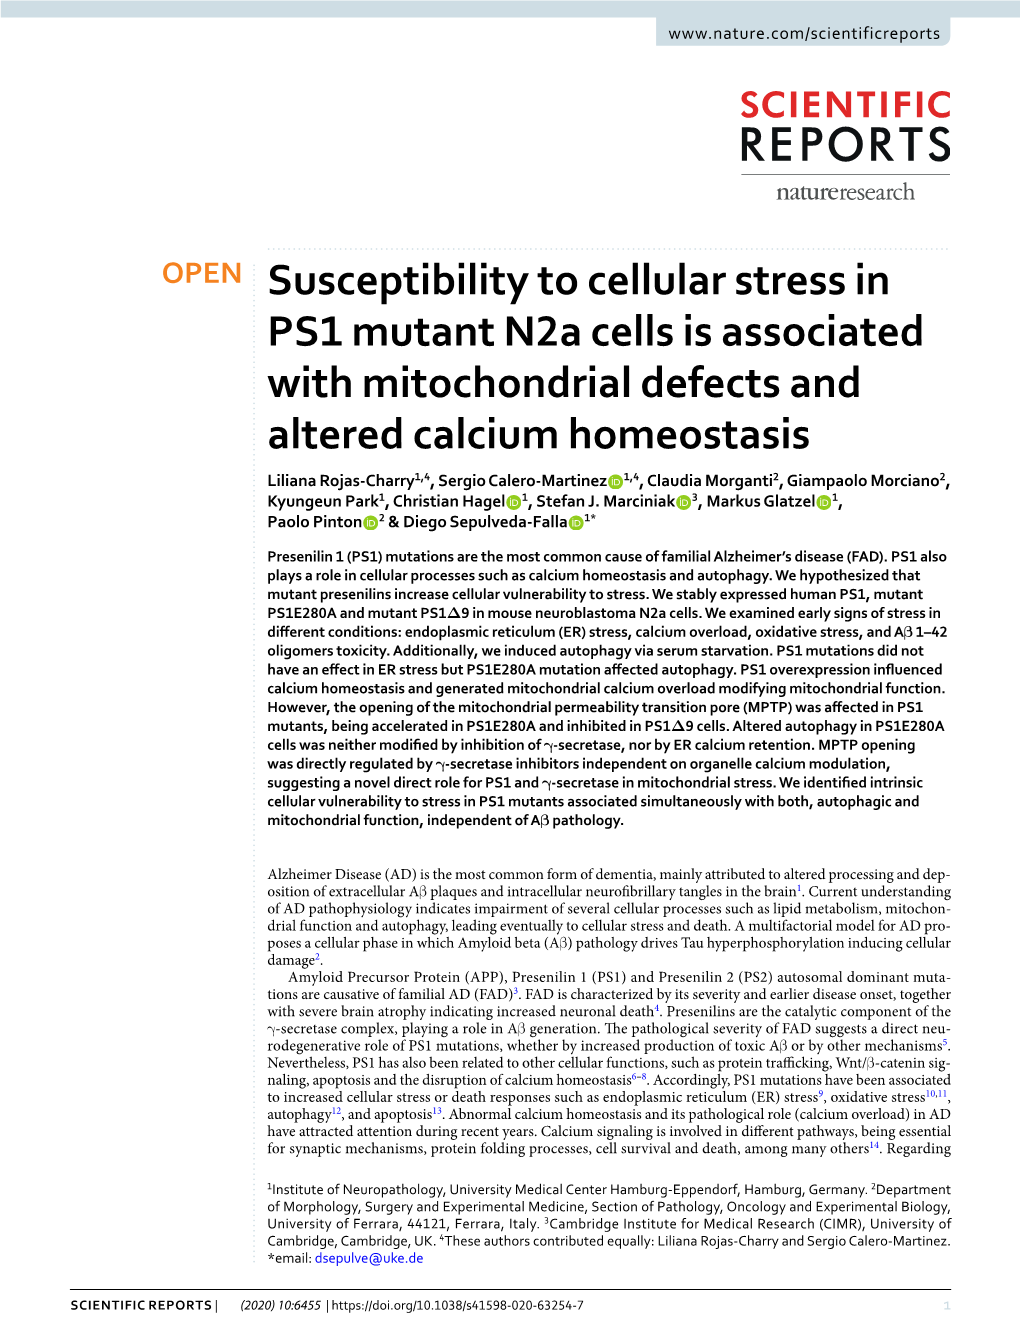 Susceptibility to Cellular Stress in PS1 Mutant N2a Cells Is Associated With